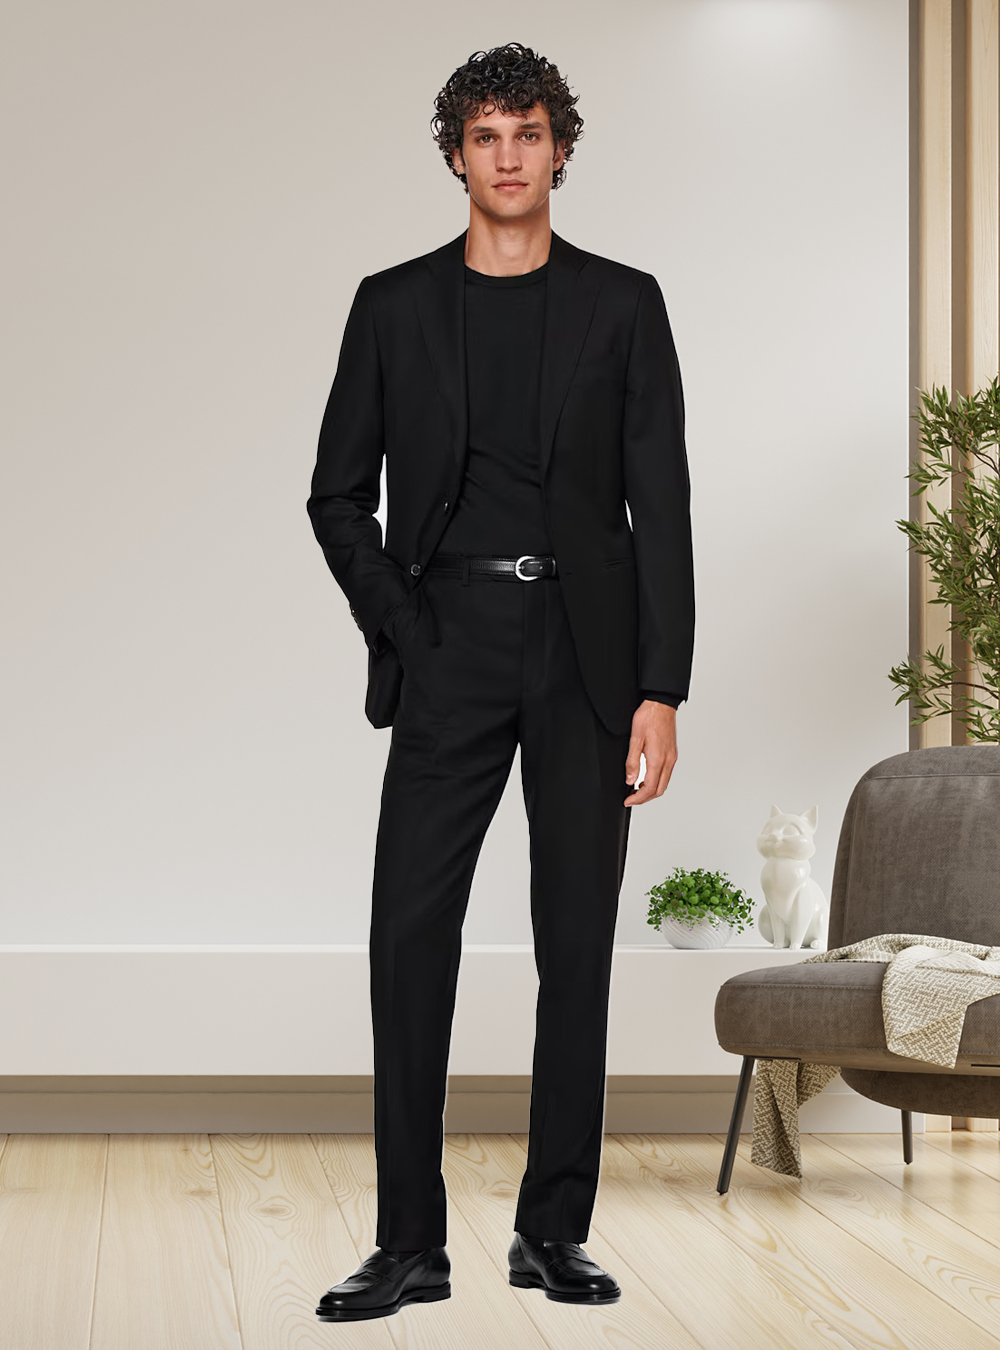 black suit, black crew-neck t-shirt, and black loafers